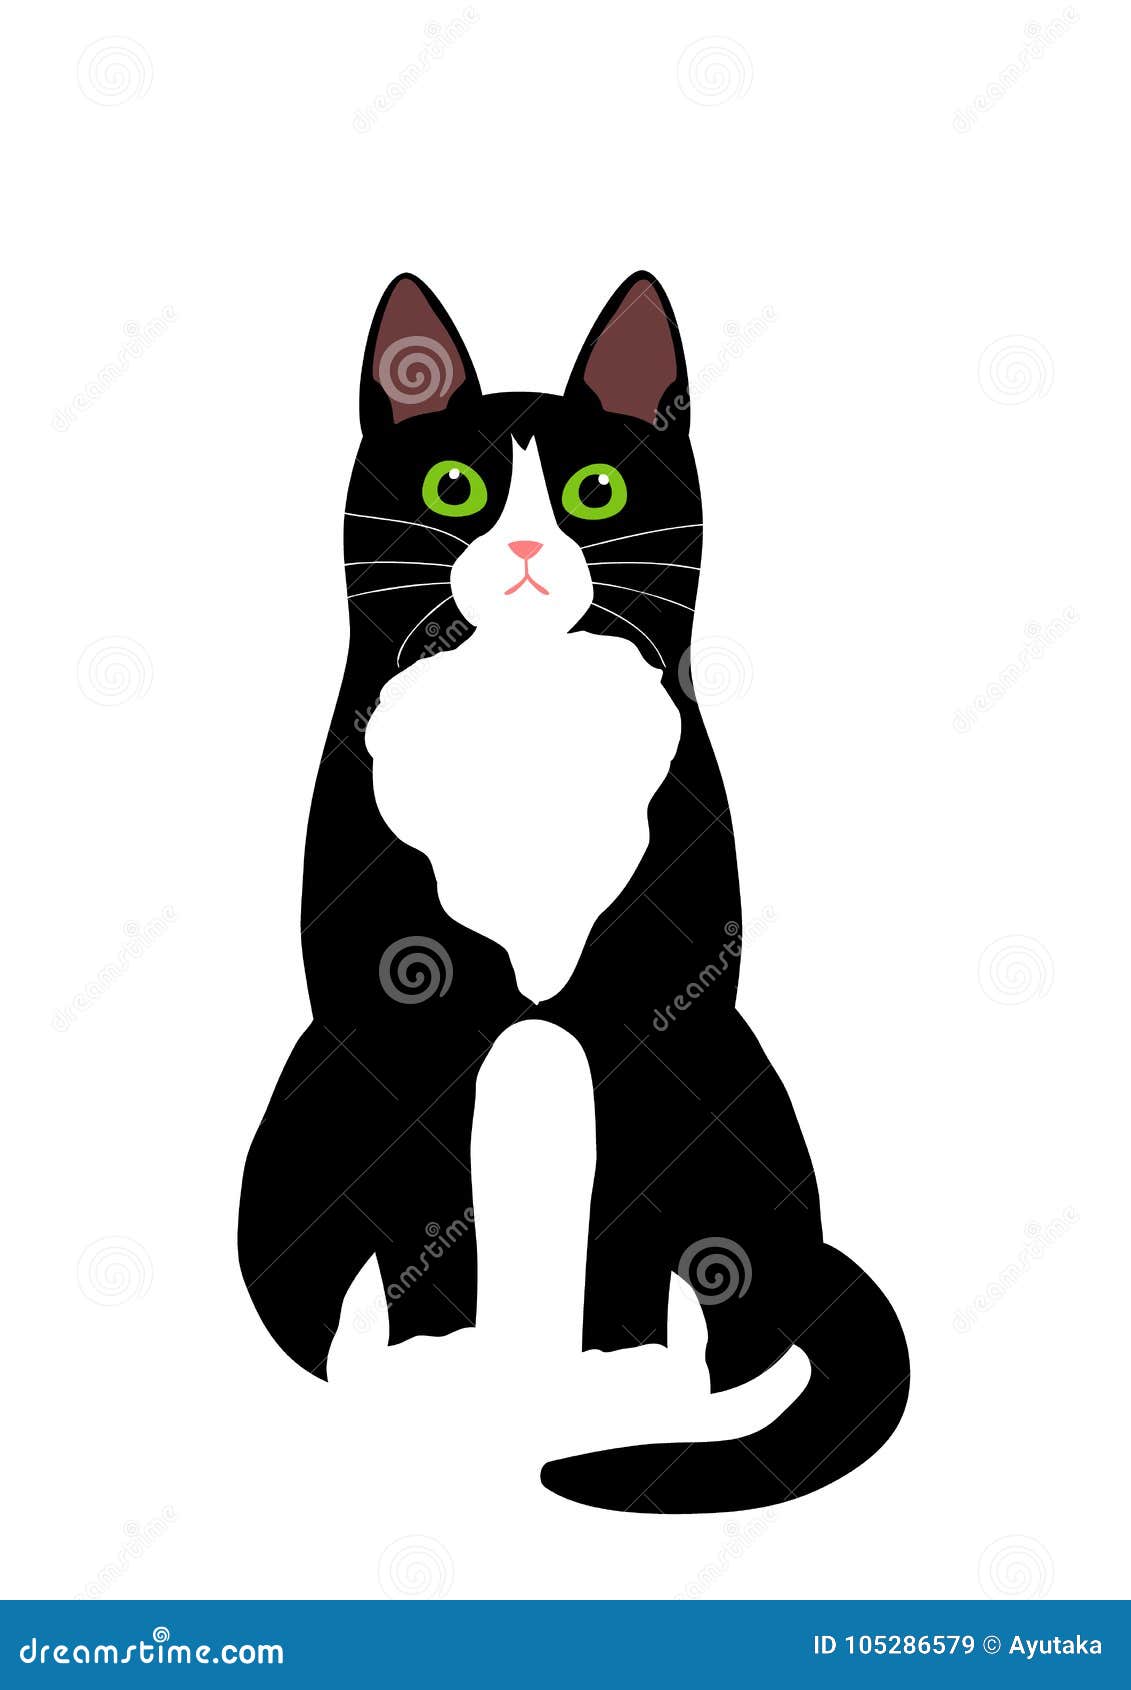 Cute Black And White Cat Sitting Stock Vector ...